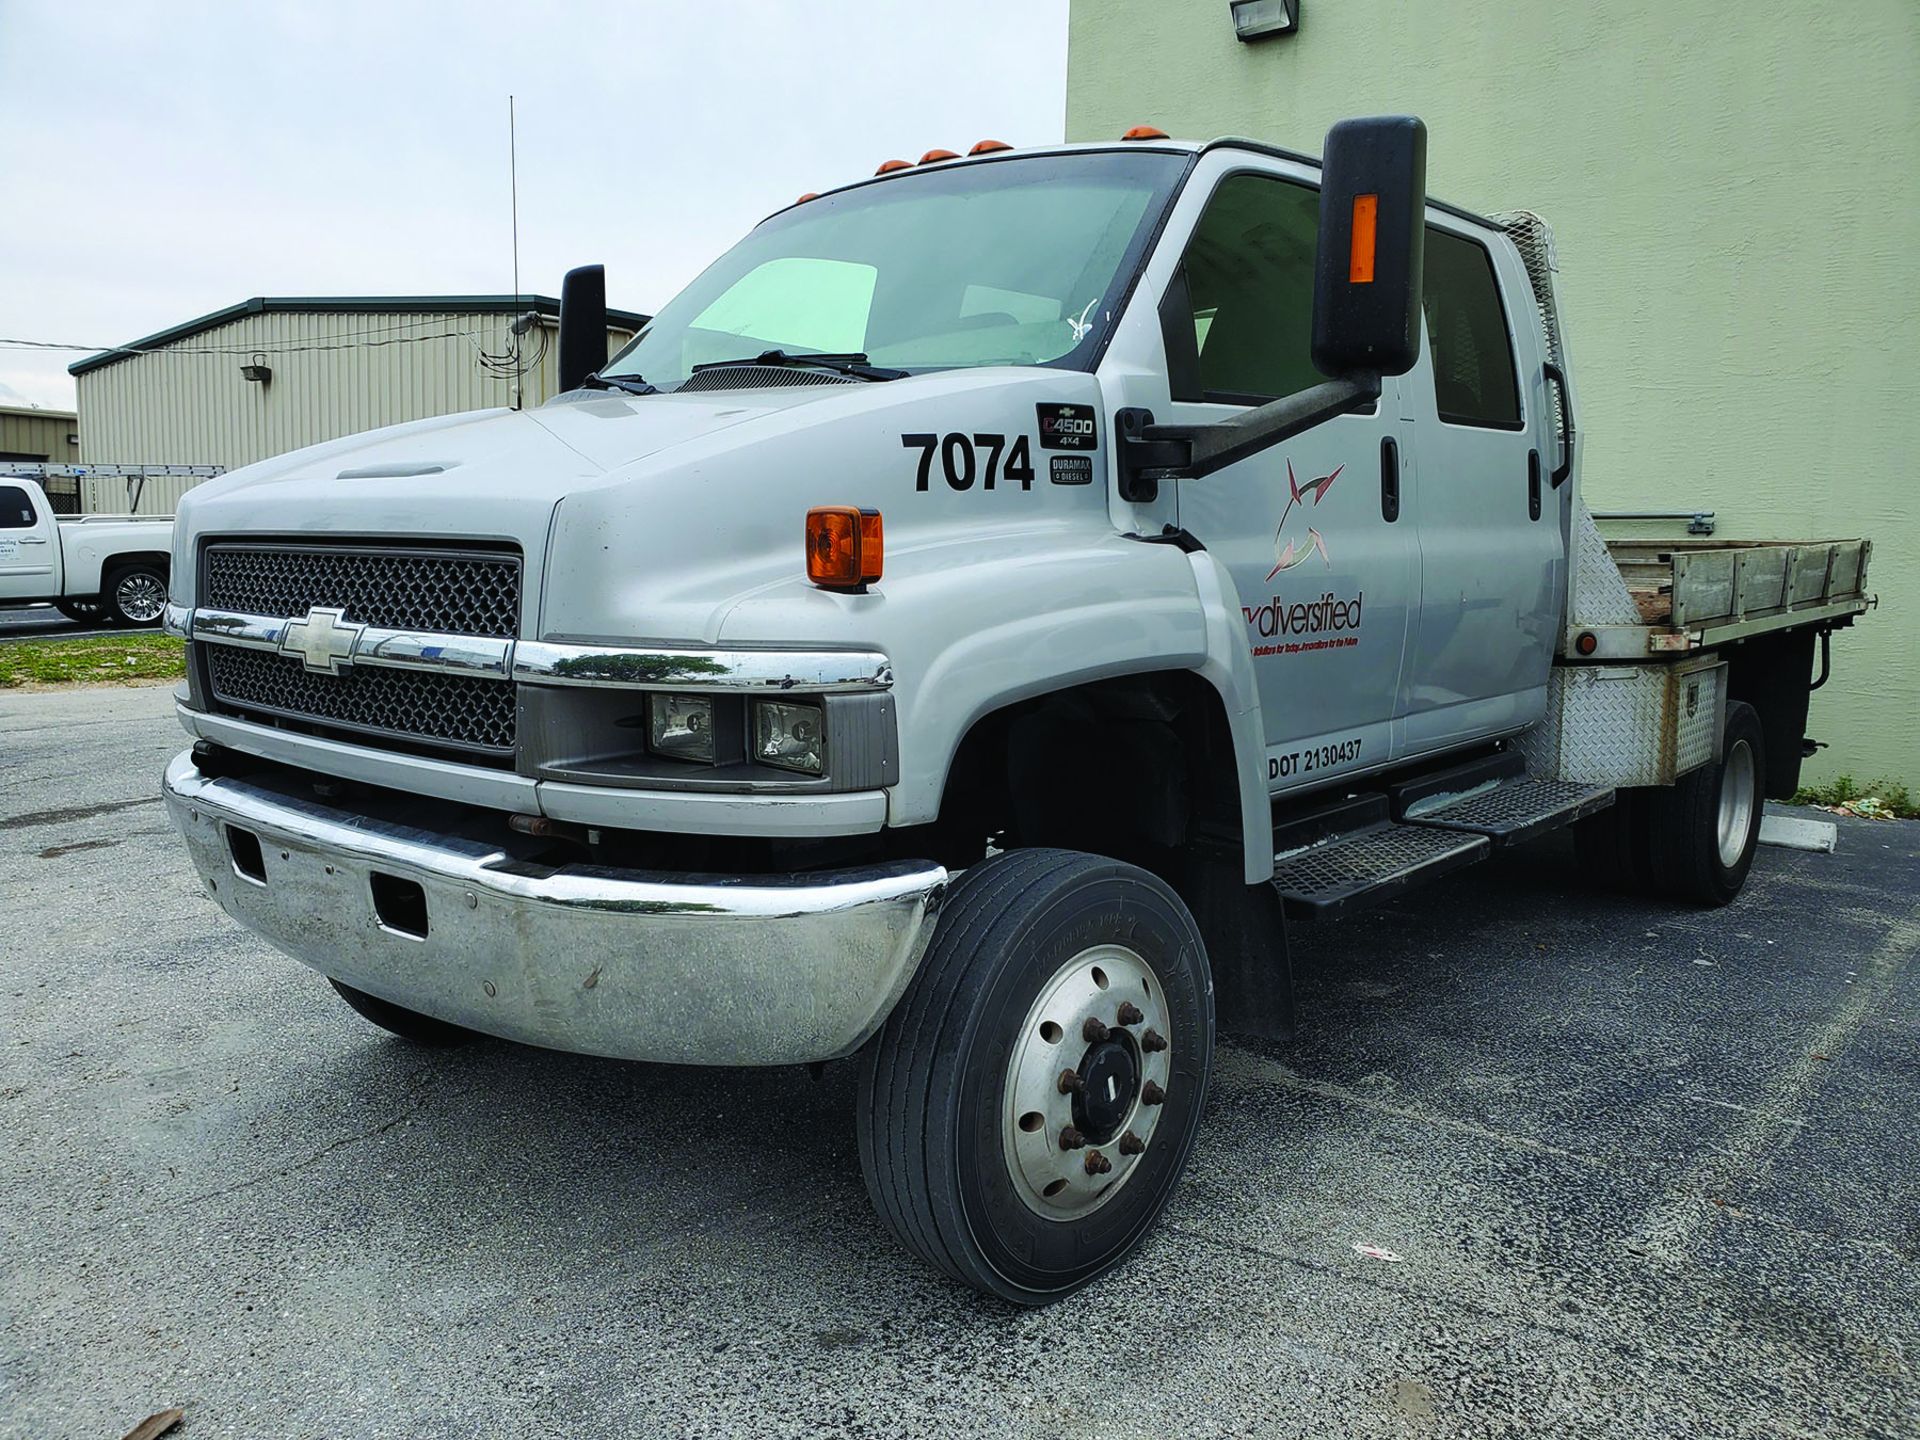 2006 CHEVROLET C4500 4X4 CREW CAB FLAT/STAKE BED TRUCK W/IMT 2015 TELESCOPING BOOM, 2.5 TON HOOK, - Image 15 of 19